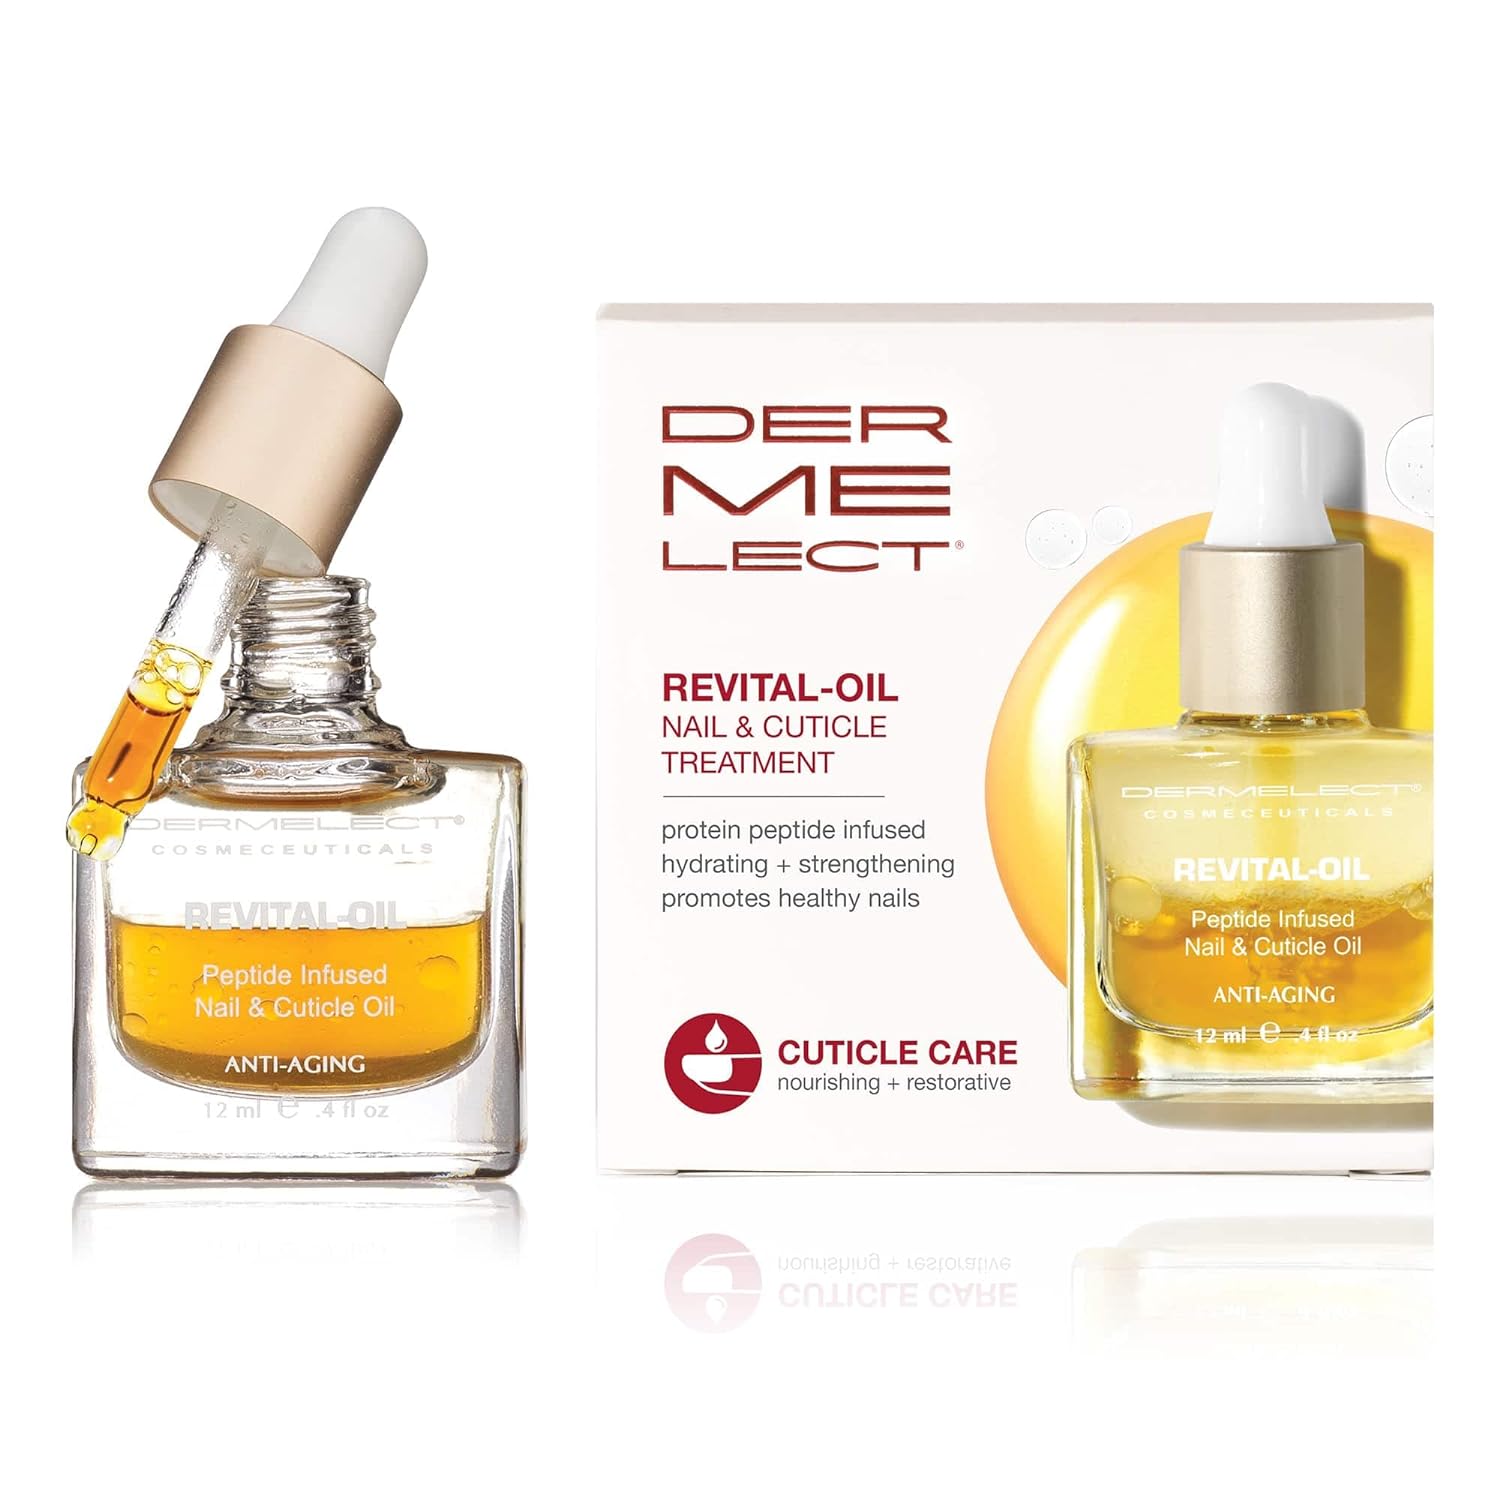 Dermelect Revital-oil Nail & Cuticle Treatment- Nourishing Oil for Dry Damaged Cuticles with Protein Peptides Argan Oil Shea Butter, Moisturizes, Soothes, Strengthens Repairs Cuticles & Nails 0.4